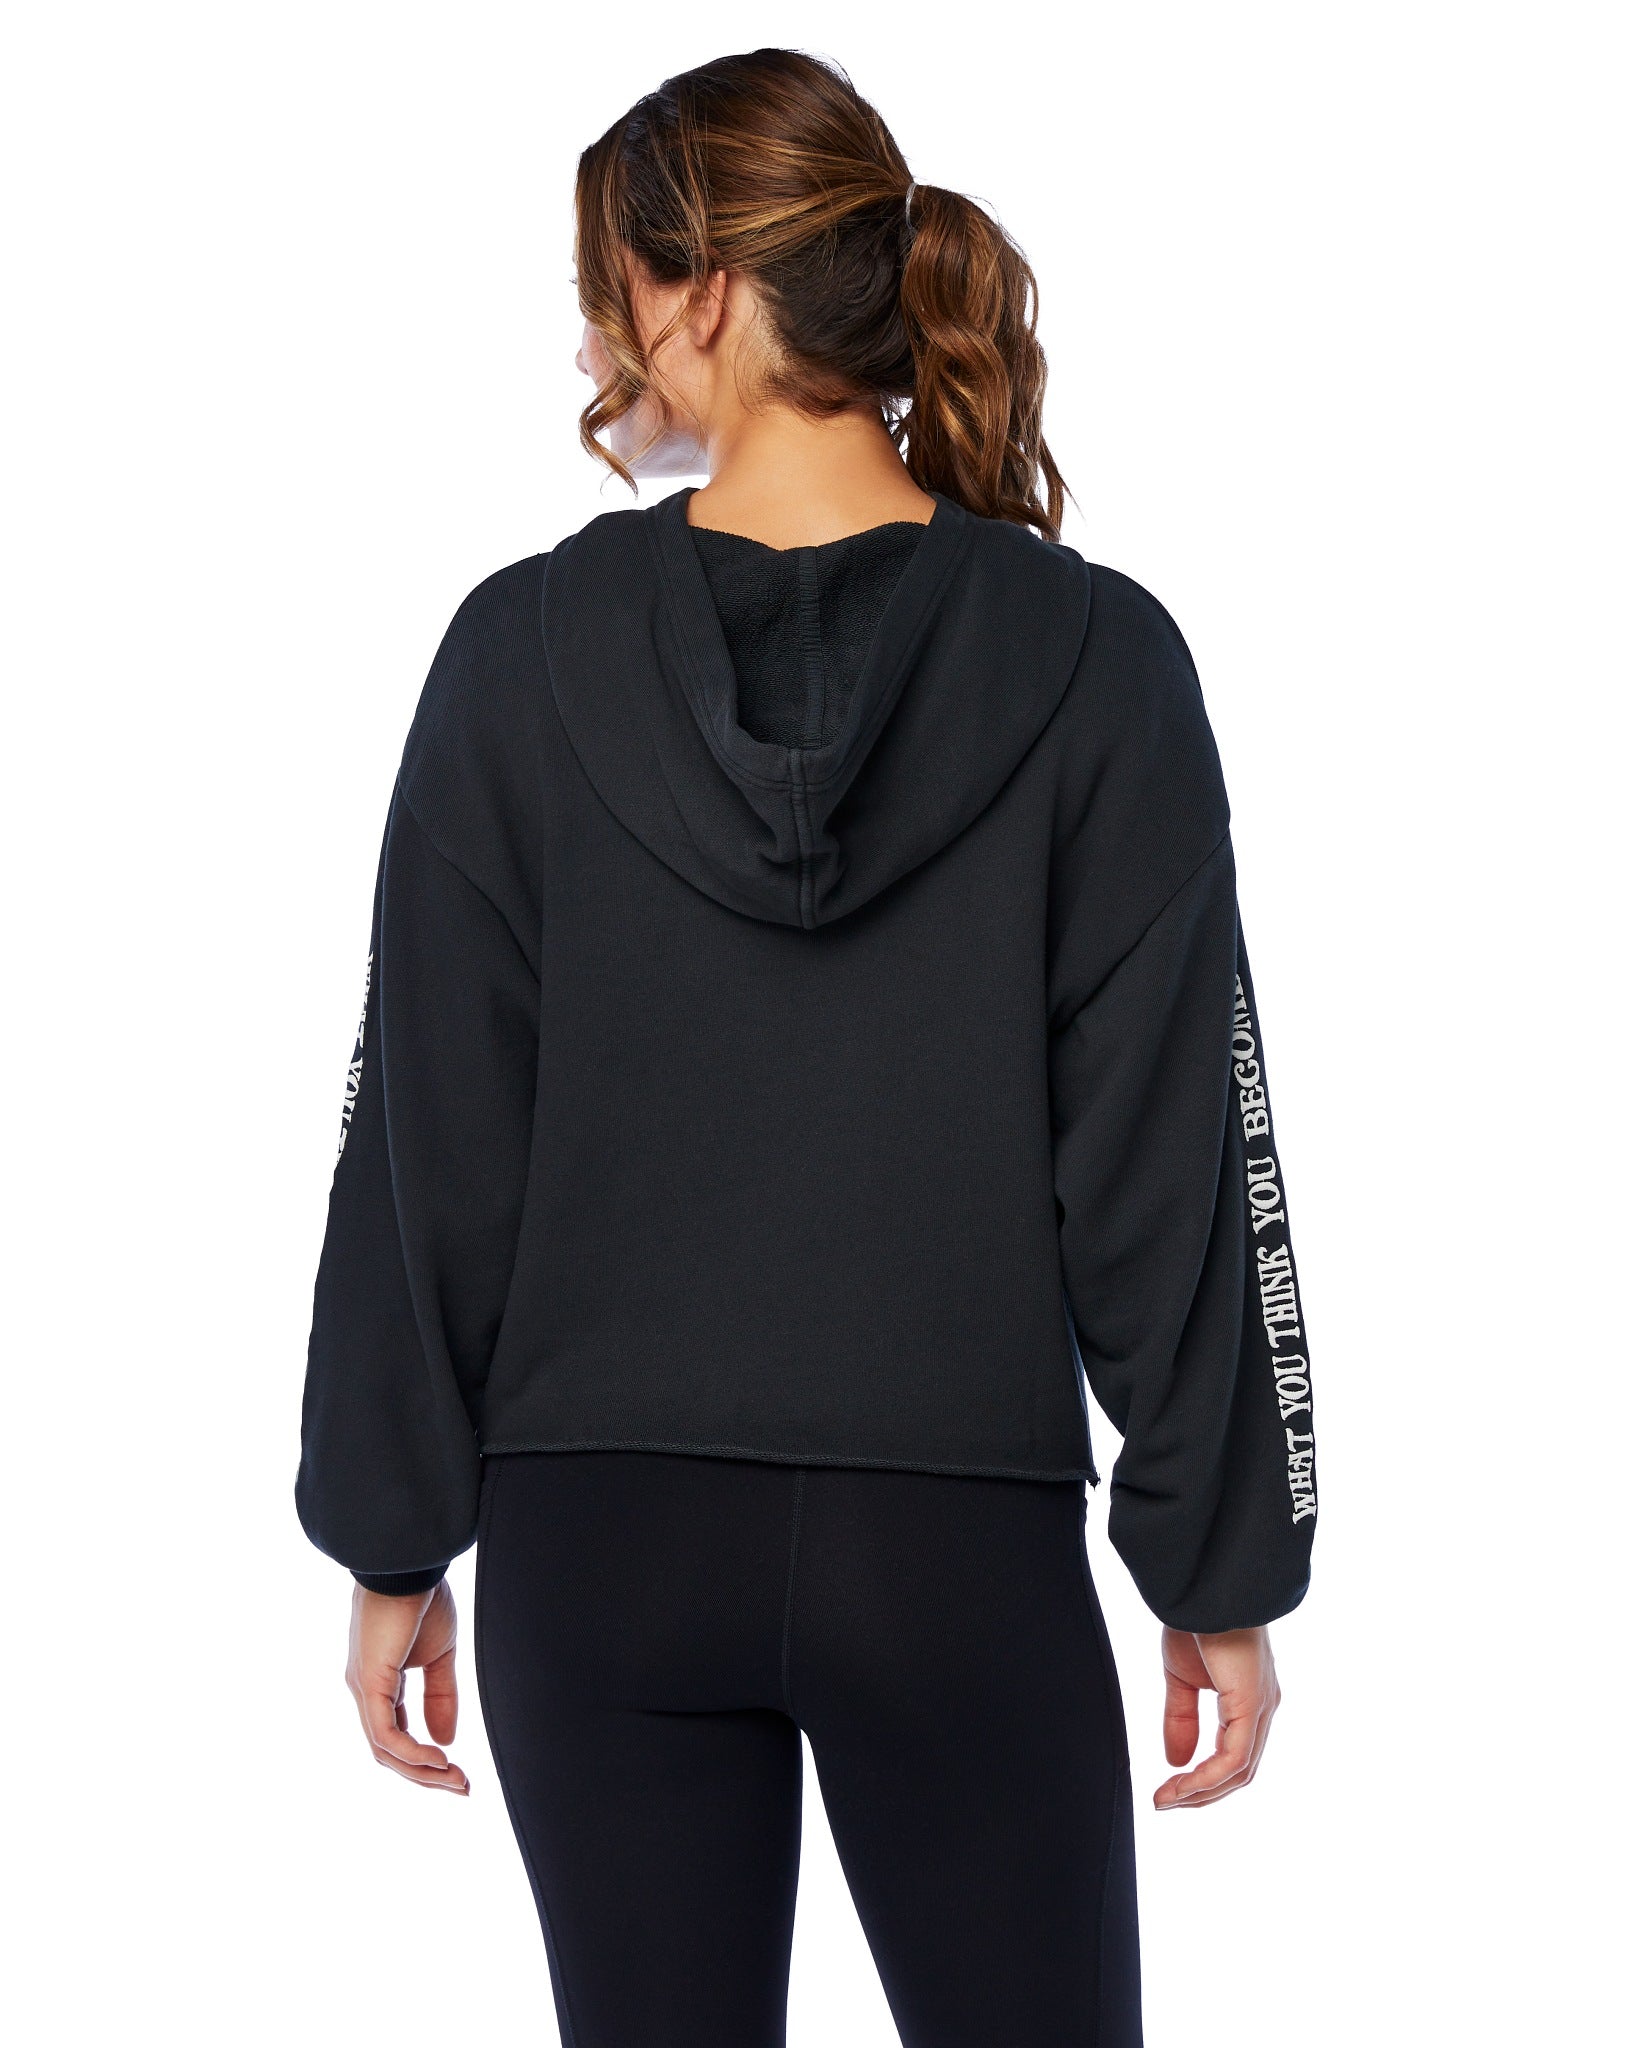 Women's Workout Pullovers